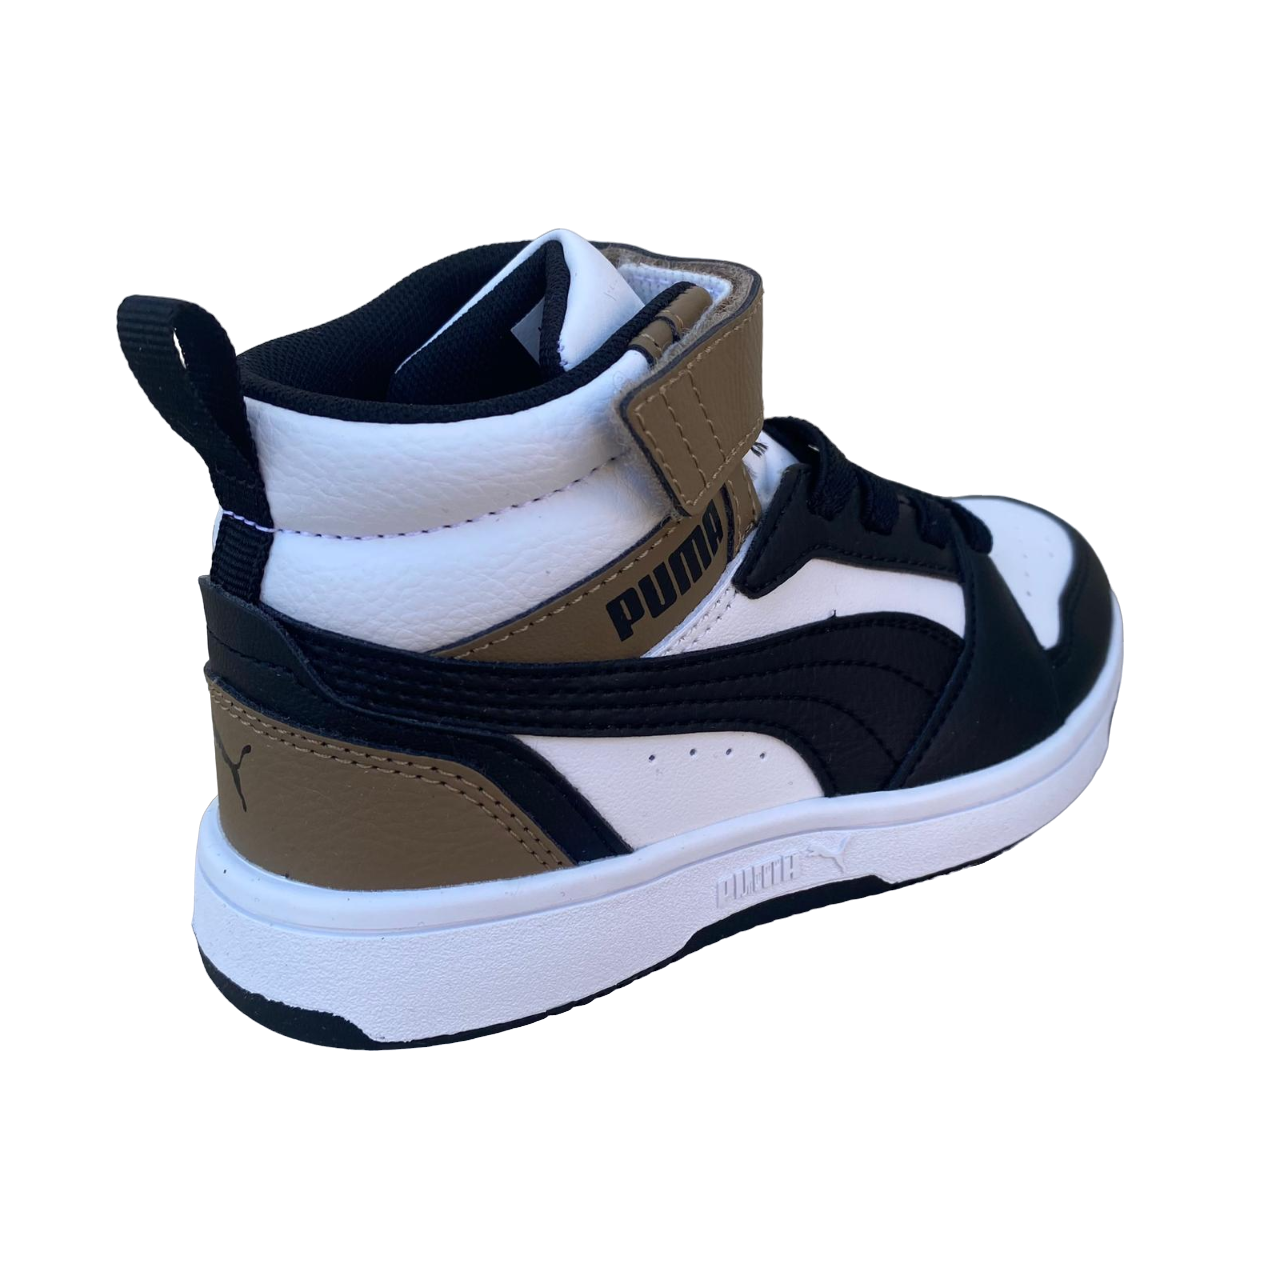 Puma boys&#39; high shoe with lace and strap Rebound V6 AC+PS 393832-08 white-black-chocolate